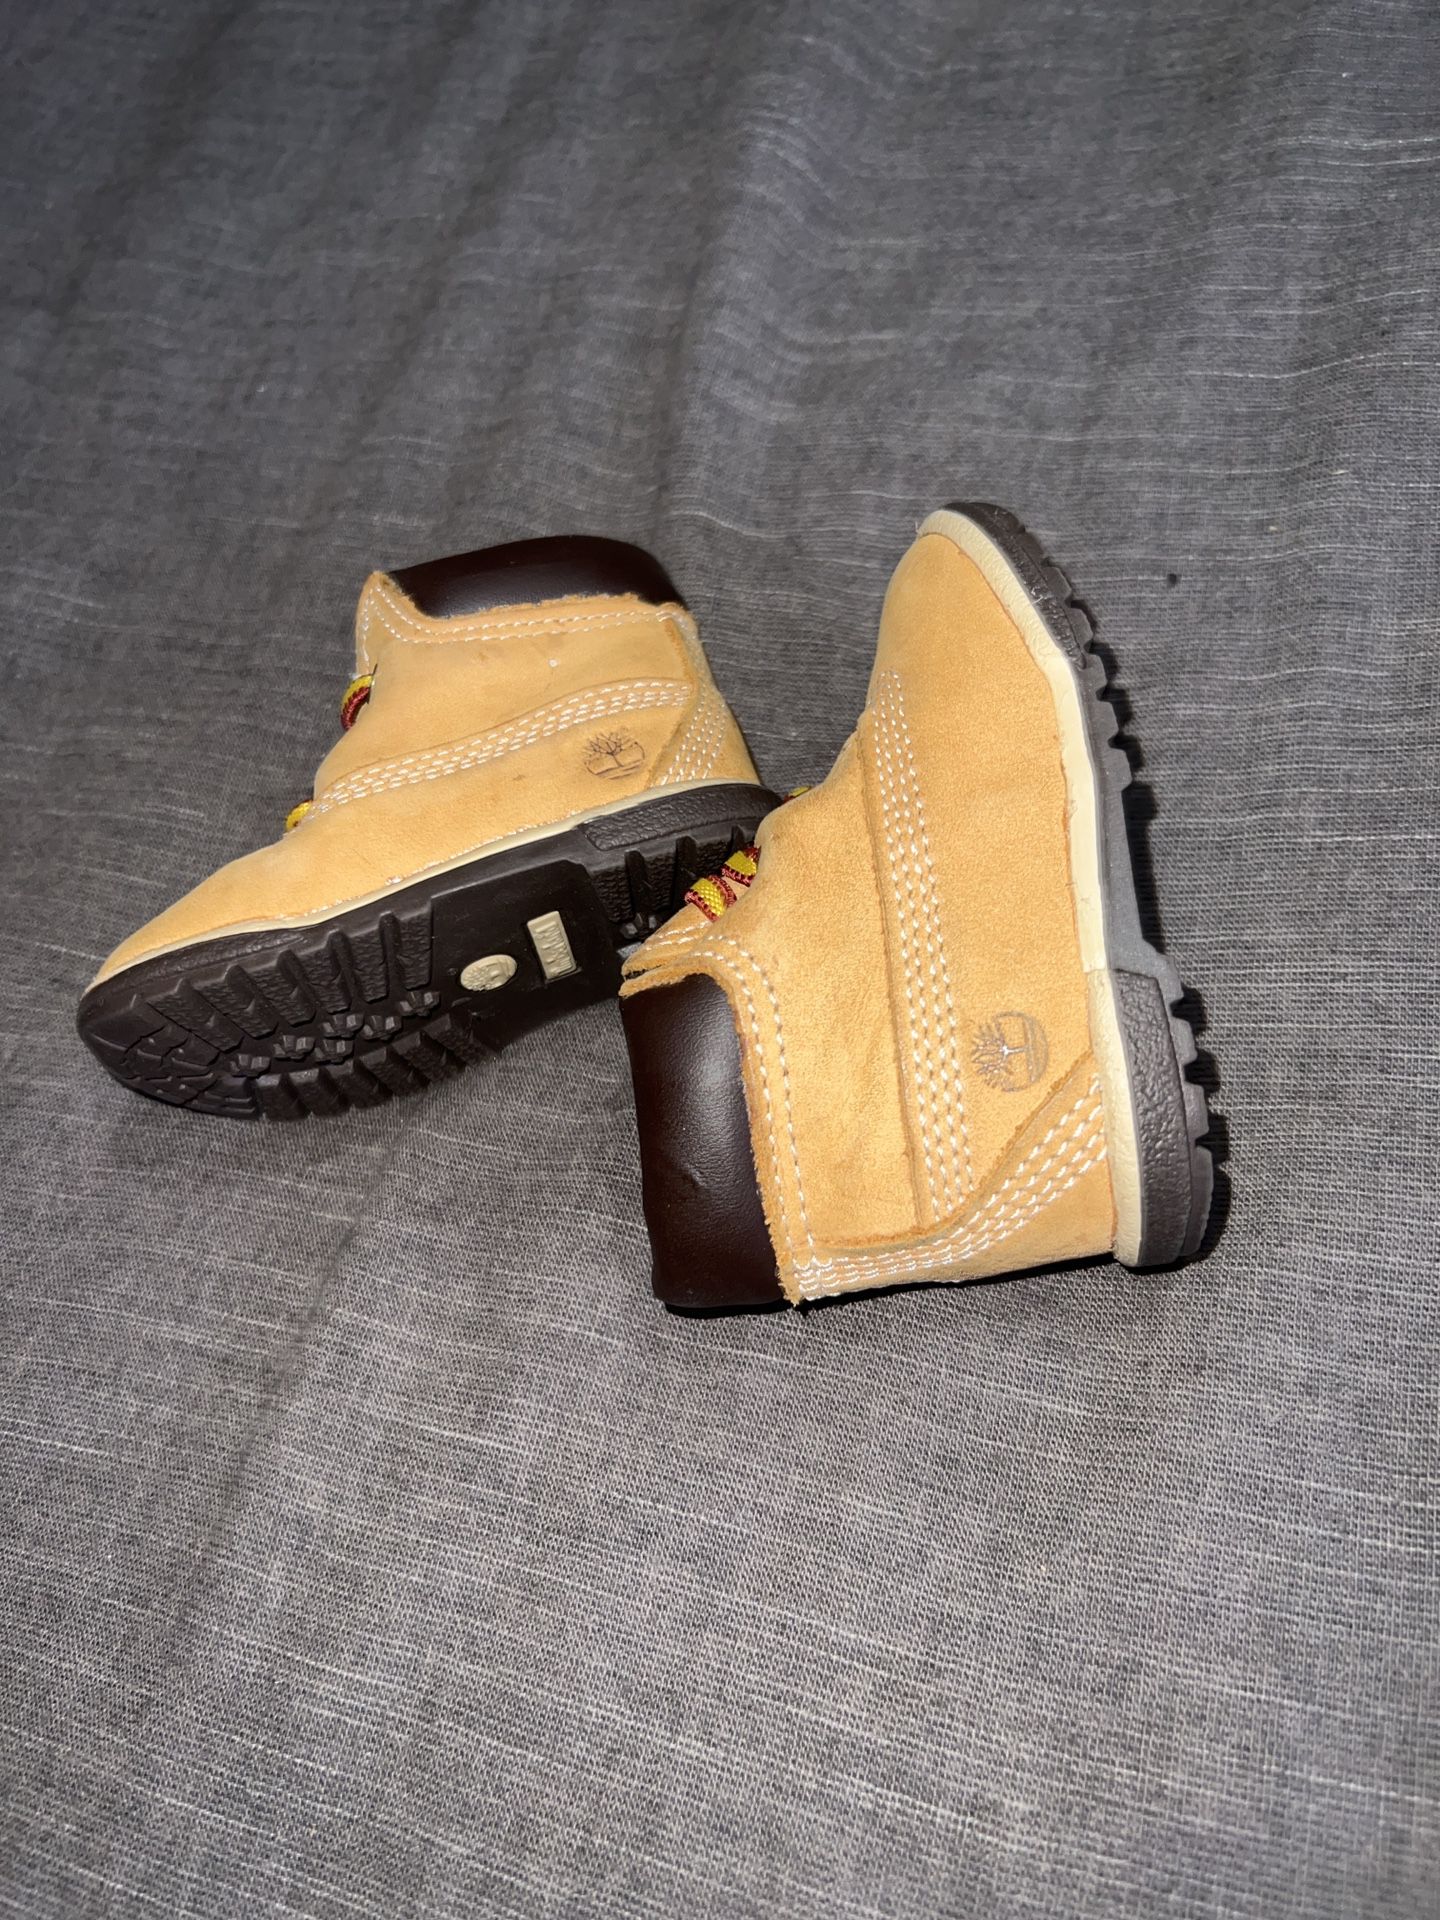 Timberland Boots Wheat Baby Shoes Nubuck size 1c